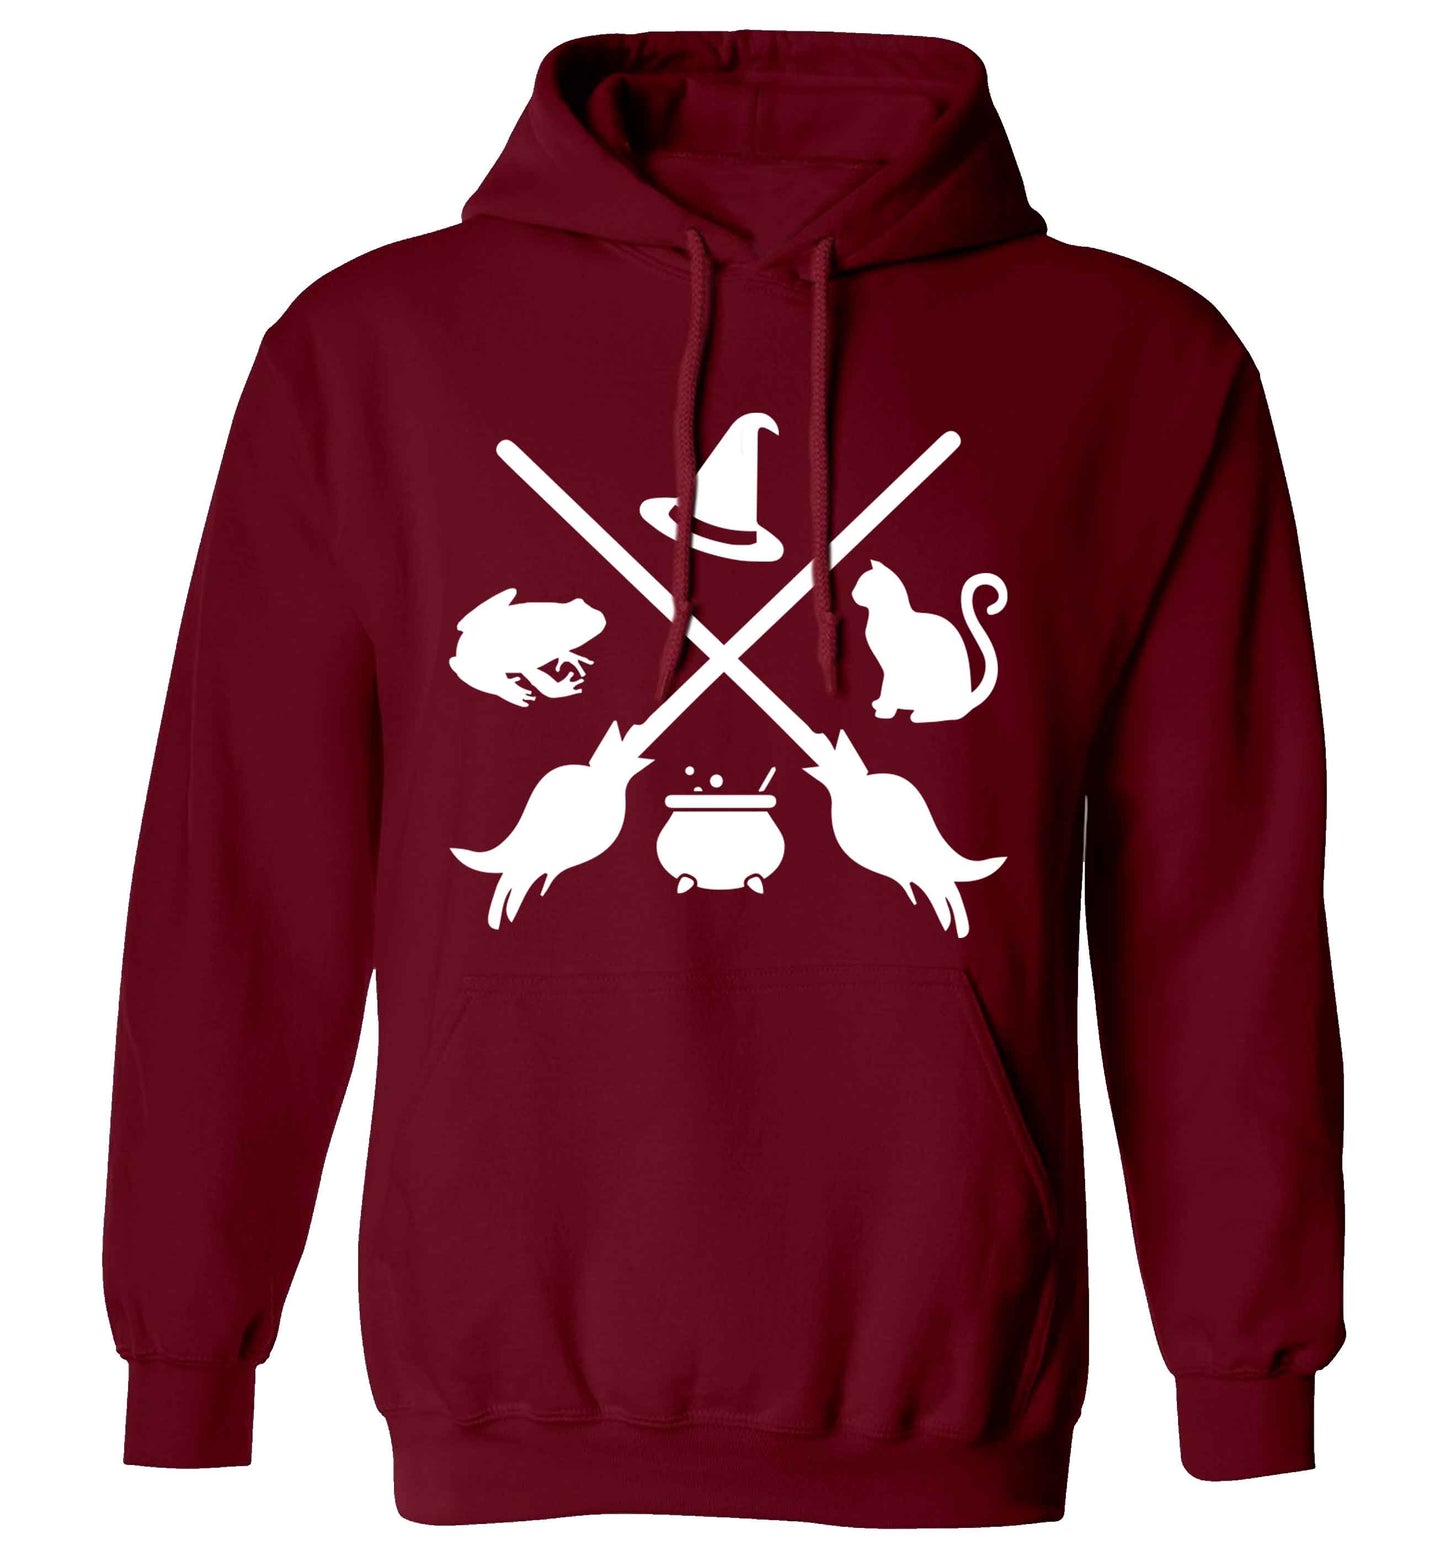 Witch symbol adults unisex maroon hoodie 2XL